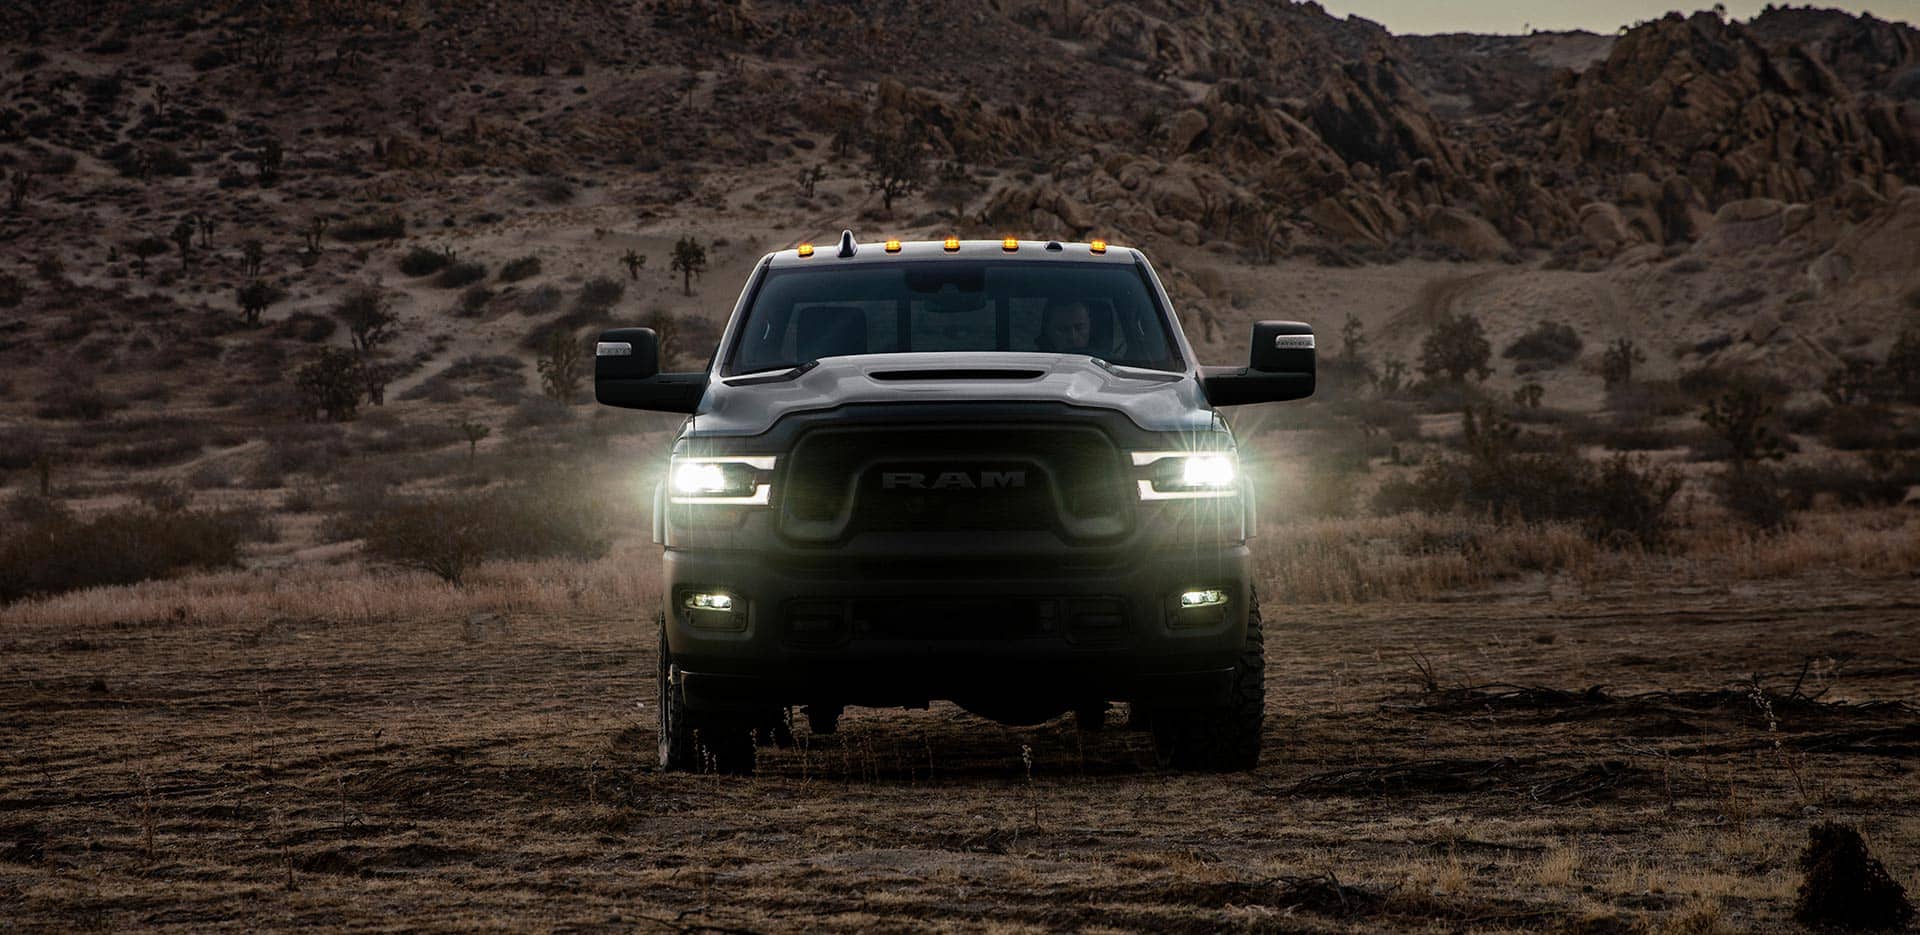 Display A head-on view of a 2024 Ram 2500 Rebel with its headlamps on, being driven off-road in the desert at dusk.